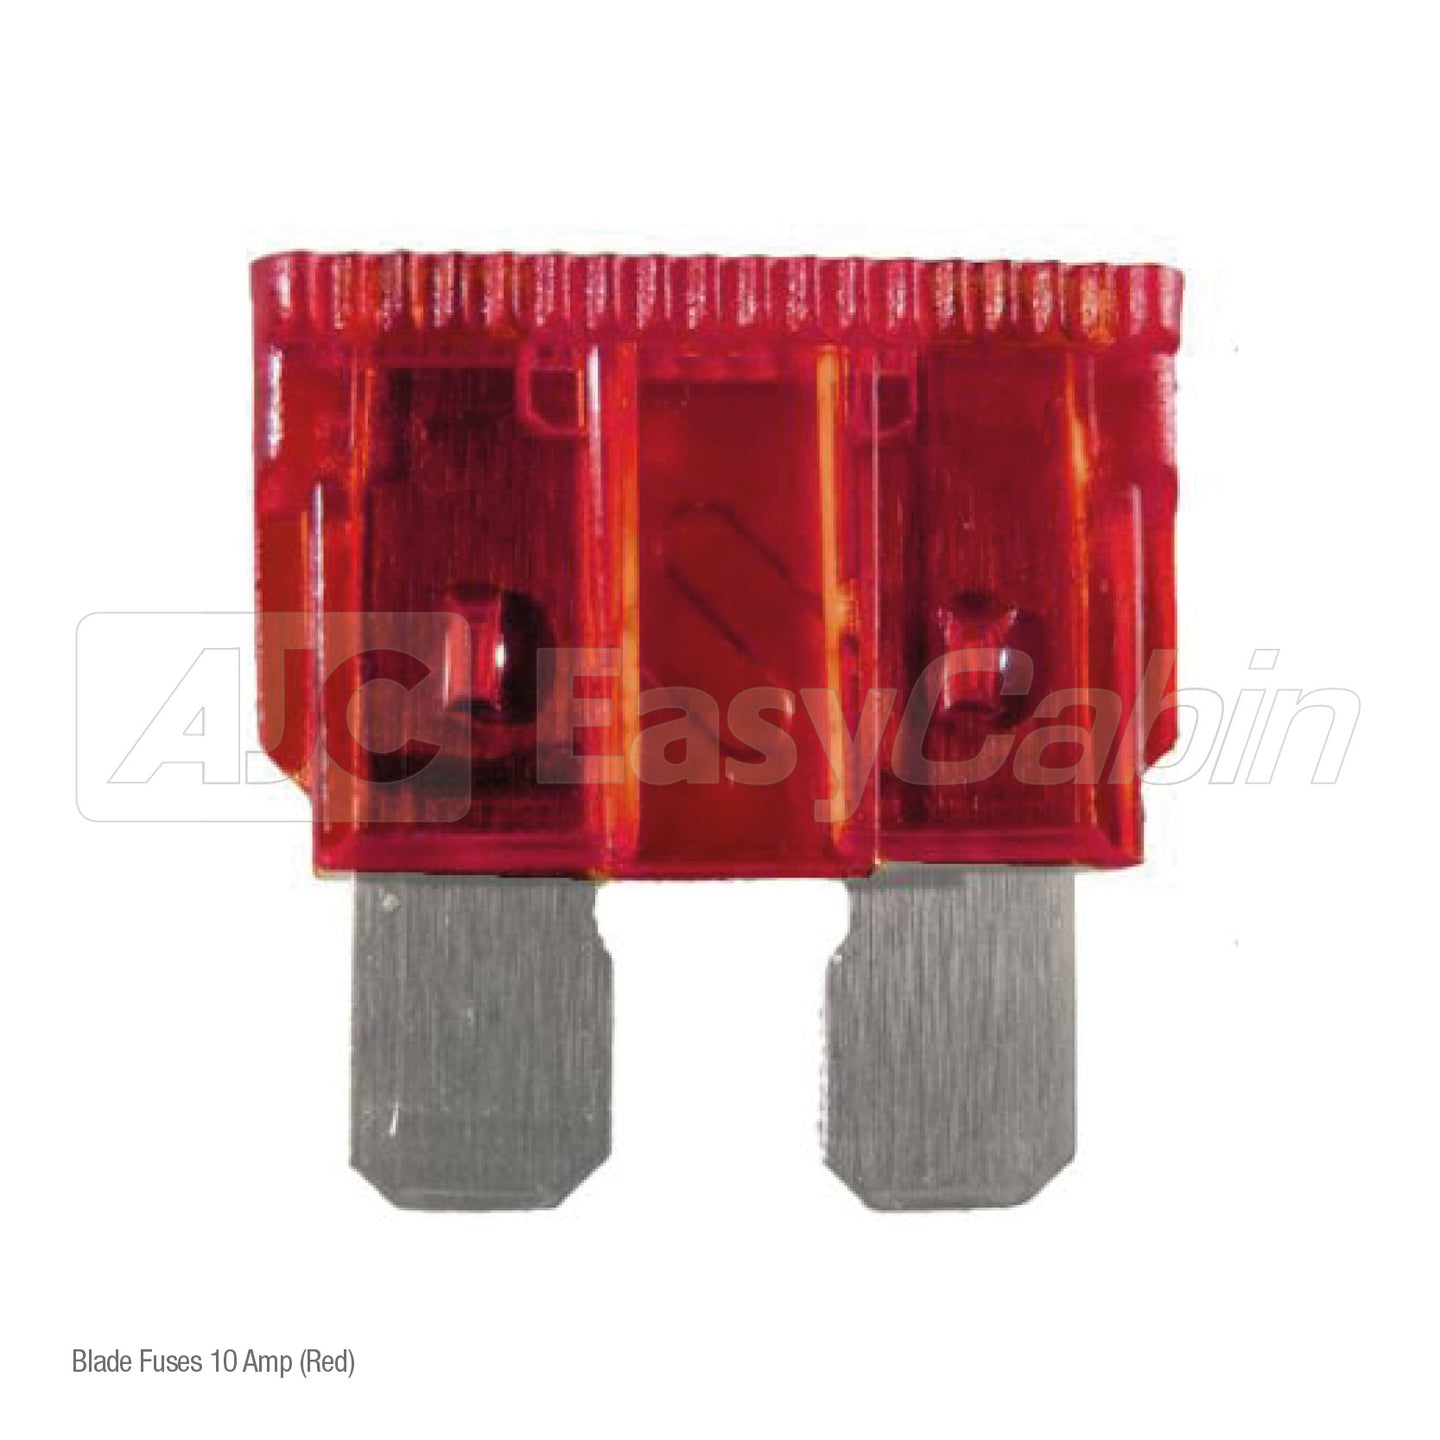 Blade fuses 10 AMP (Red)